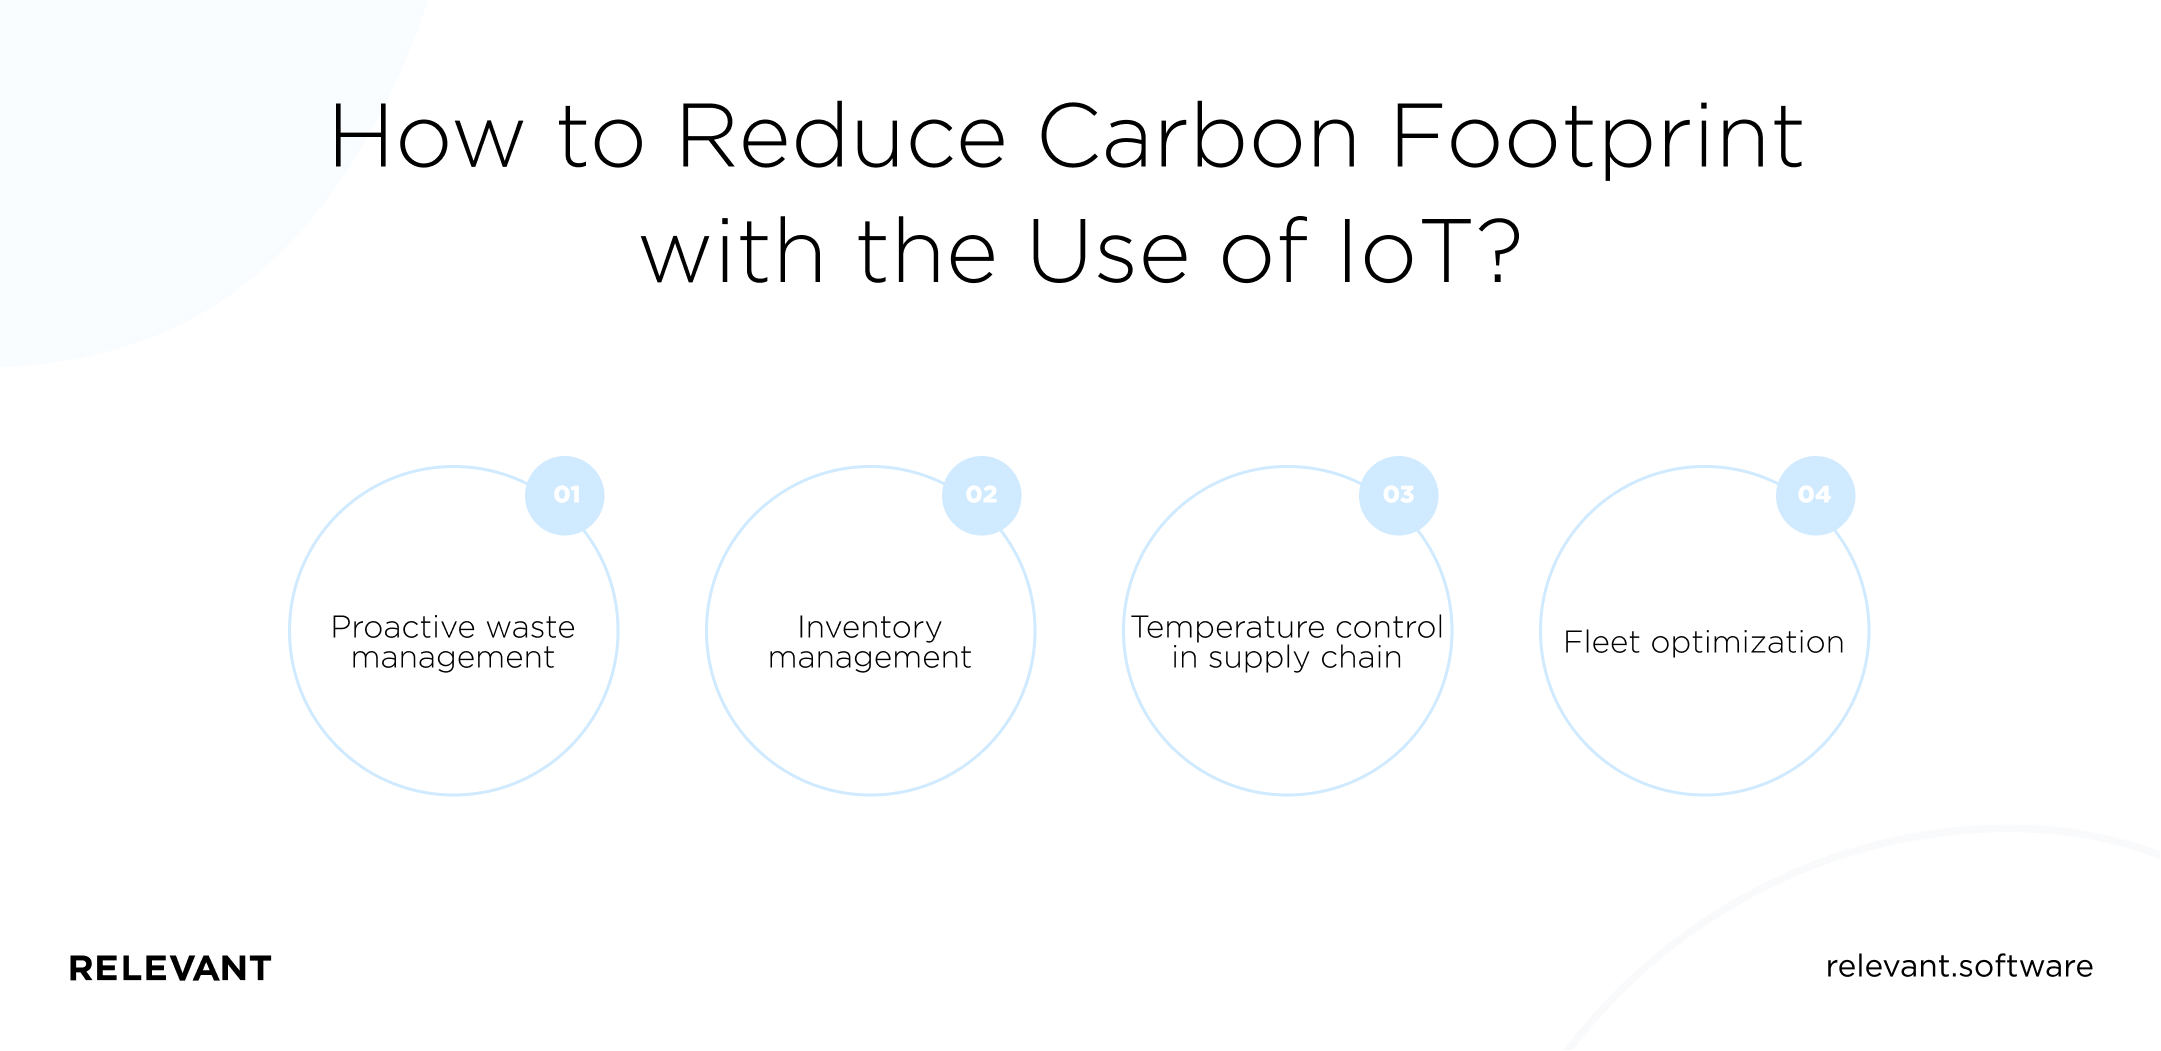 How to Reduce Carbon Footprint with the Use of IoT?